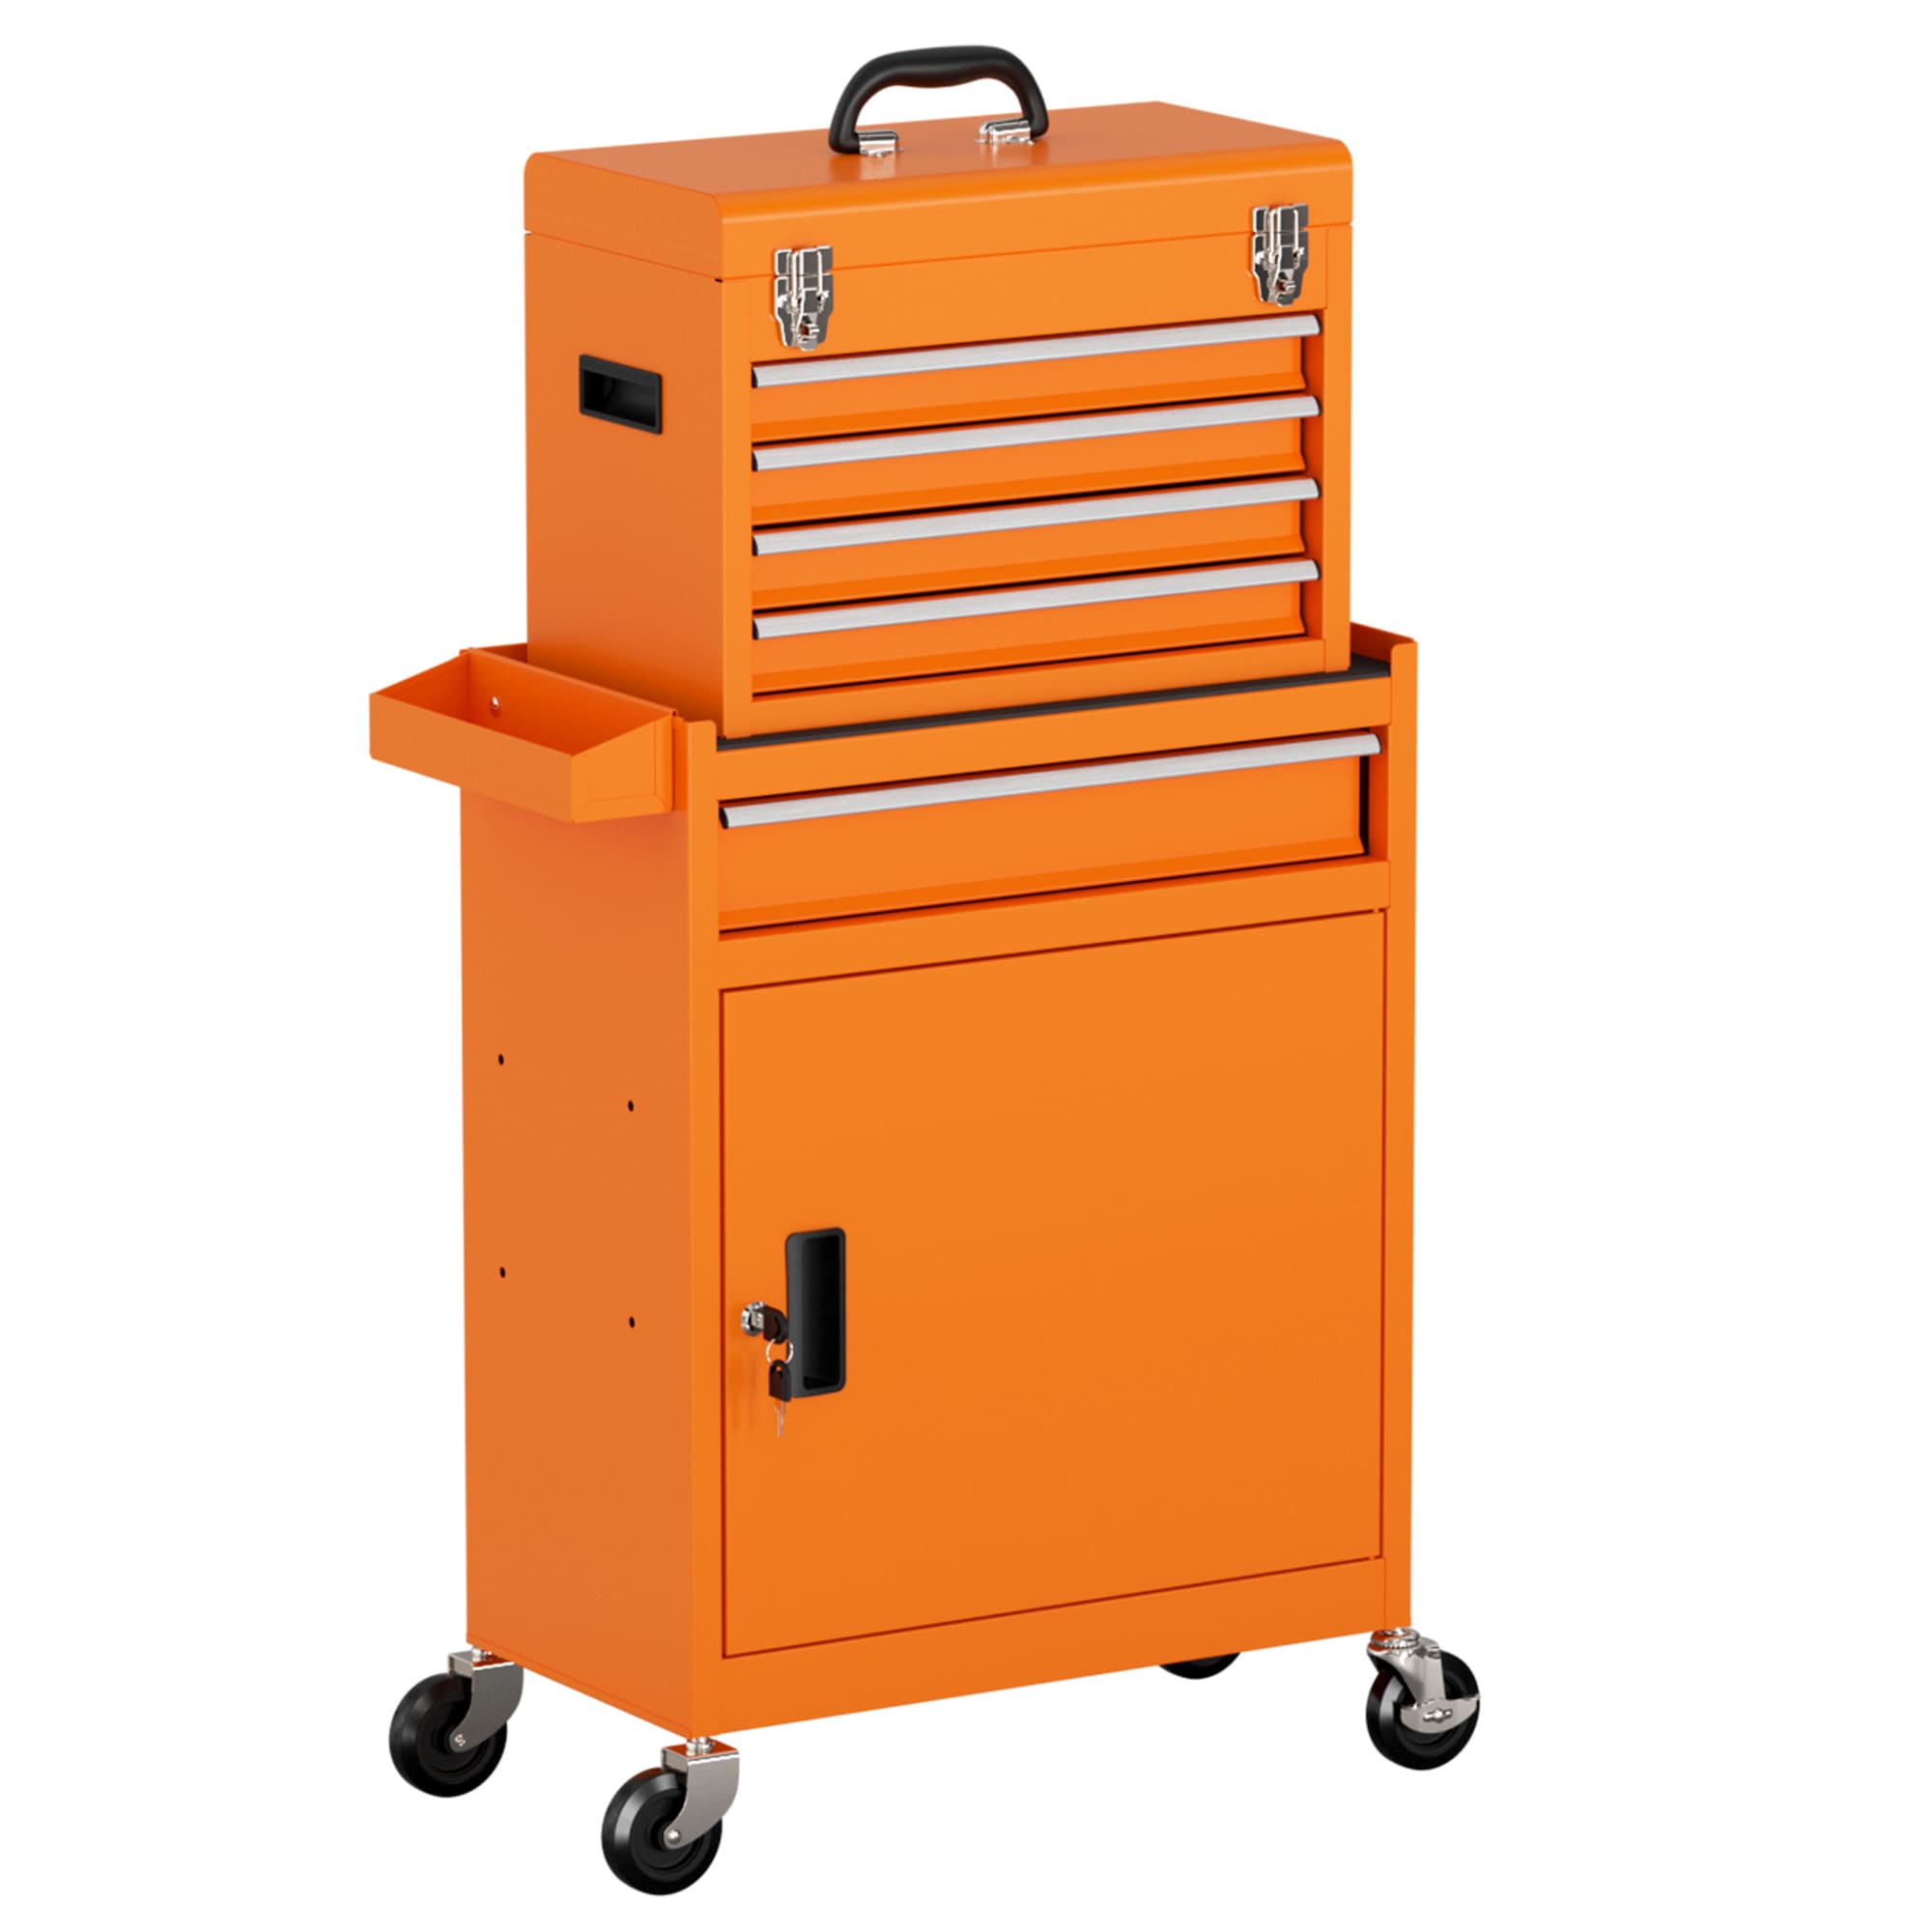 20.6-in W x 41.1-in H 5 Ball-bearing Steel Tool Chest Combo (Orange) Stainless Steel | - RaDEWAY TH111202-01-ORG